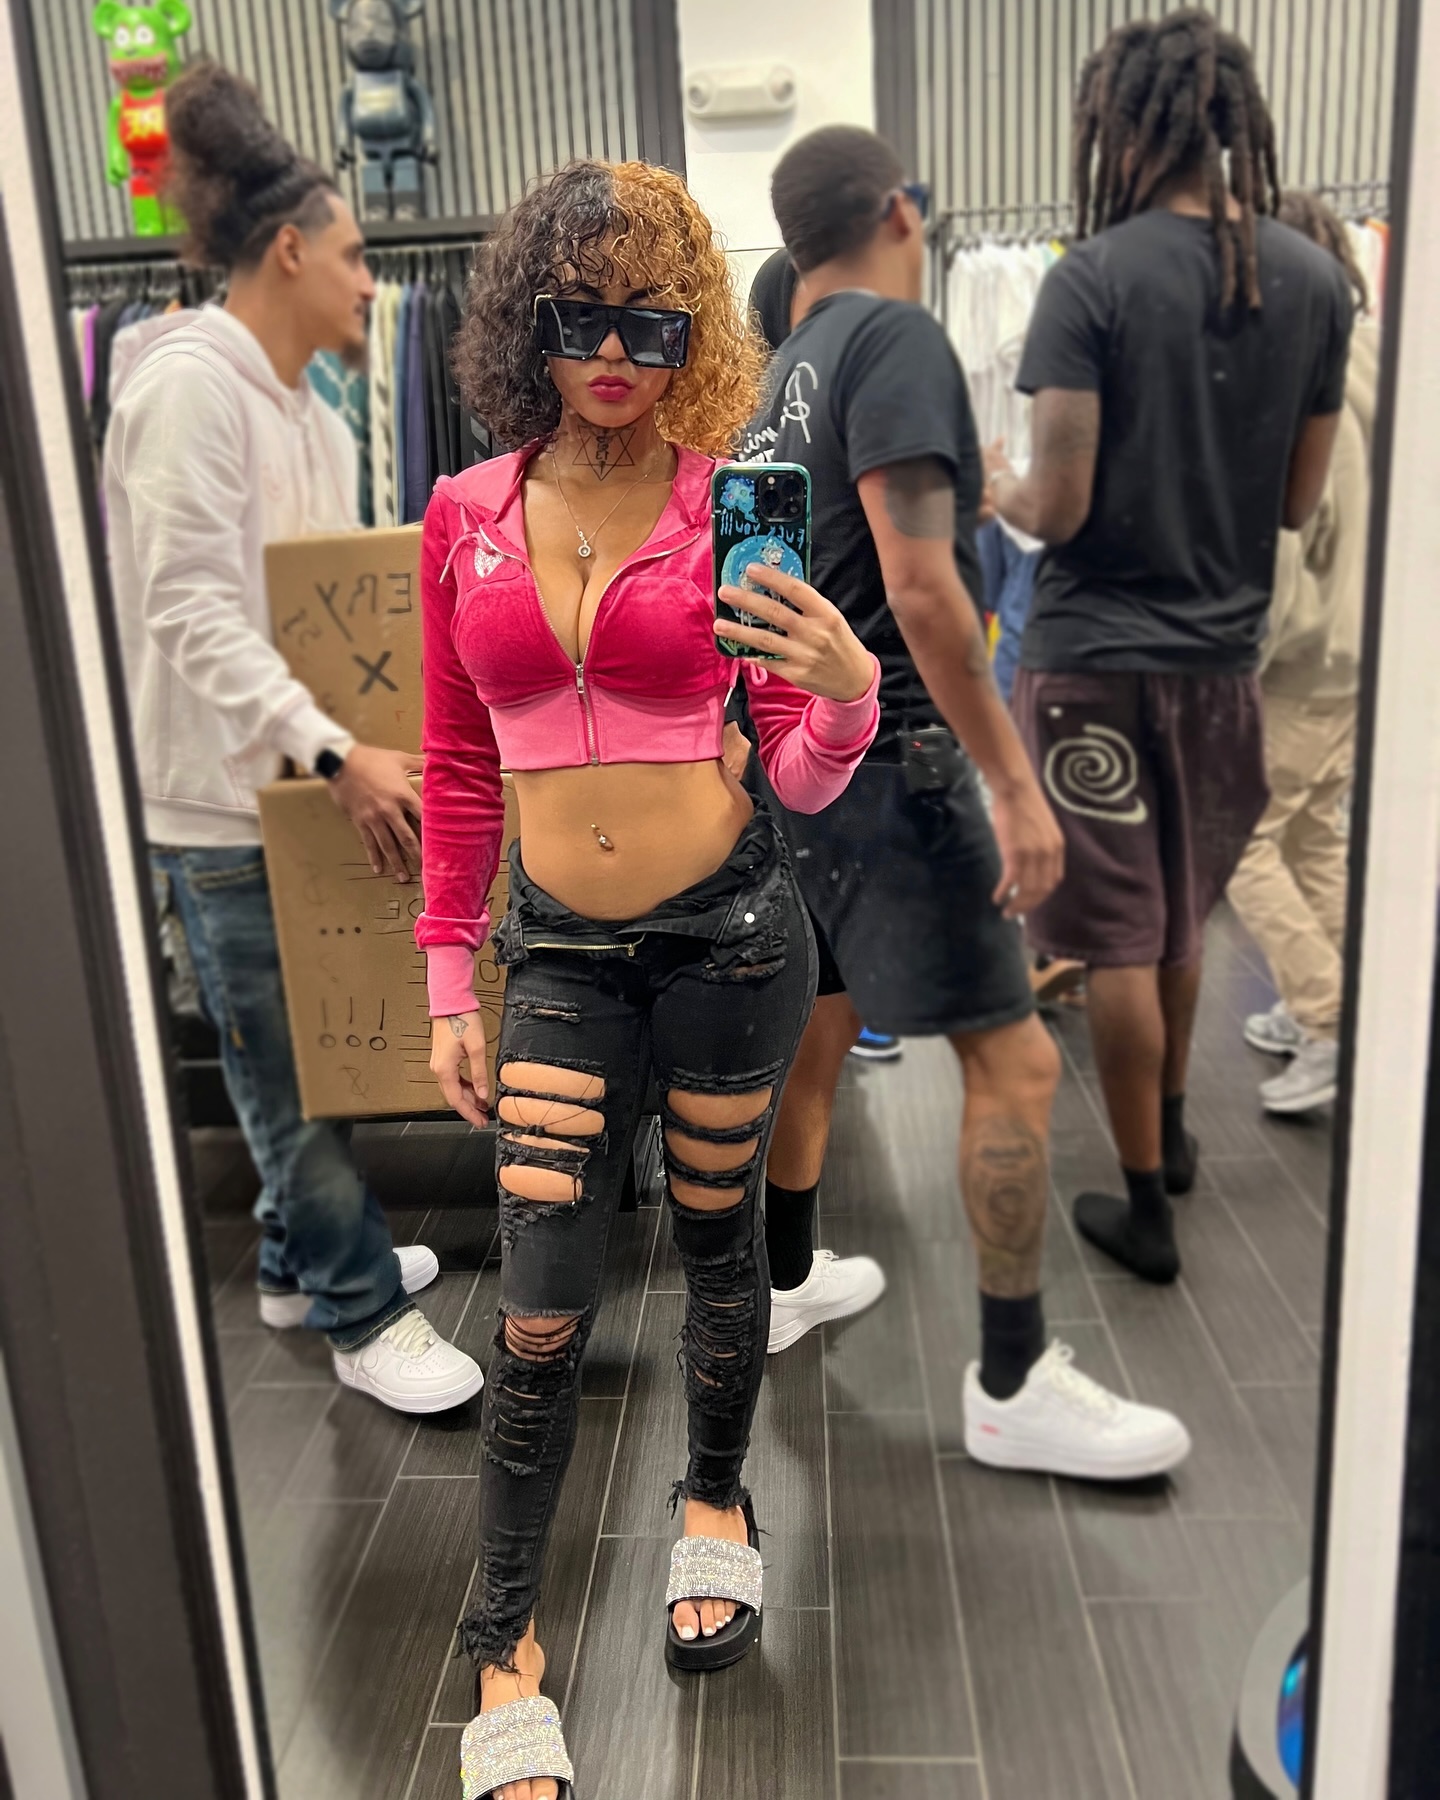 You see me walking in the mall.. wyd? 👀💕